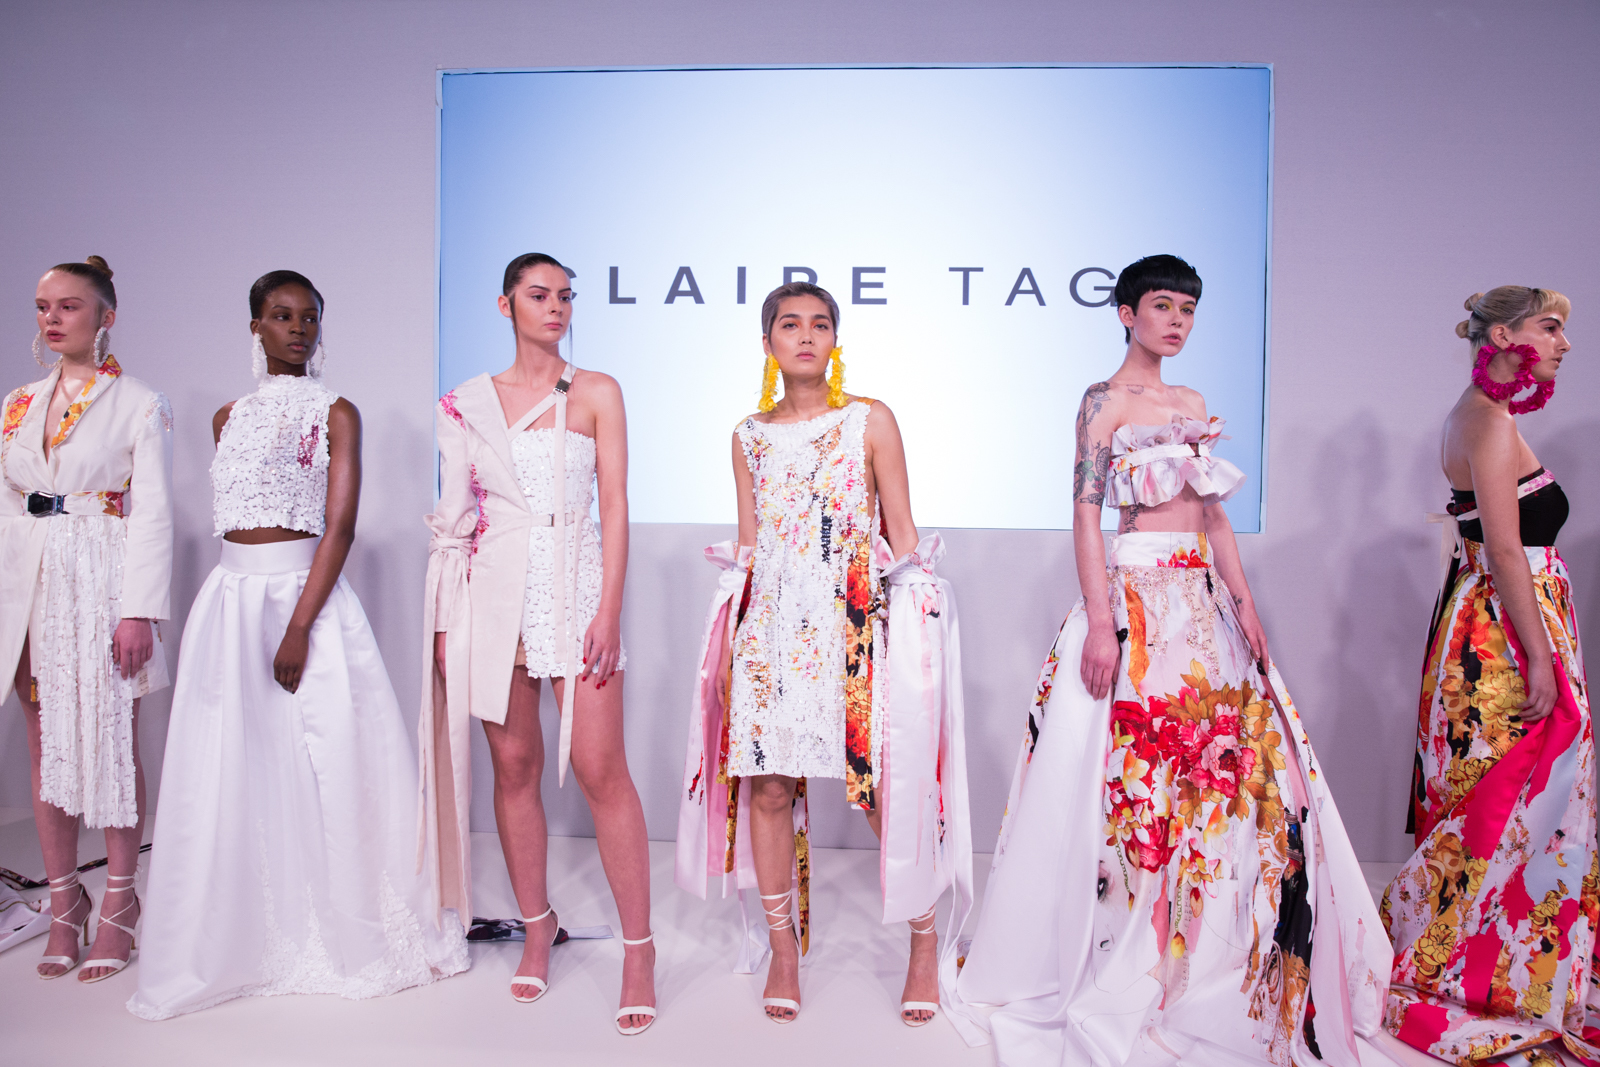 Group shot of 5 outfits at the Claire Tagg FW18 presentation at London Fashion Week